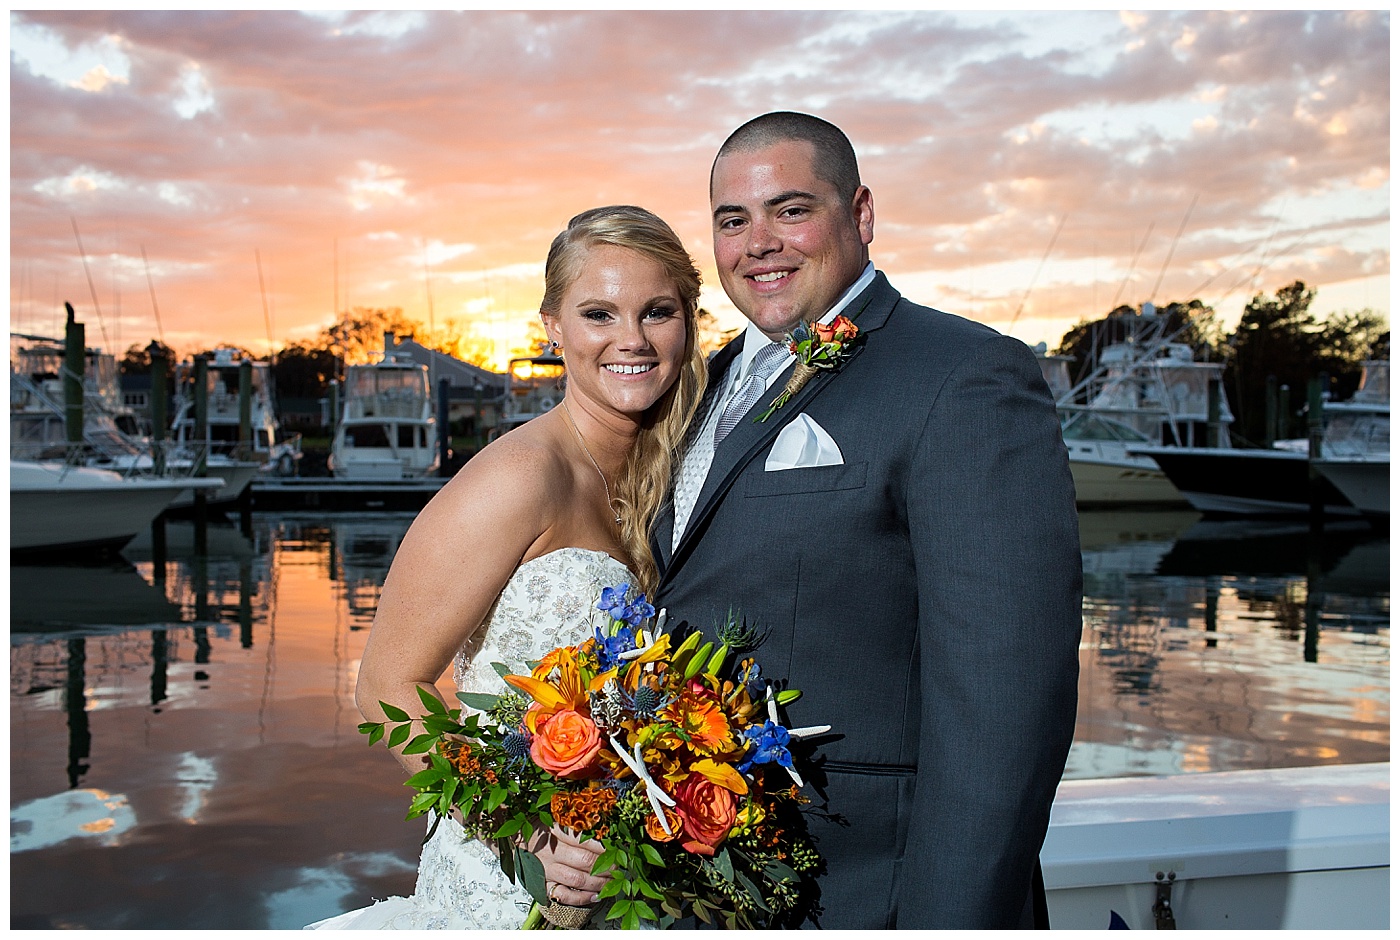 A fall inspired wedding at the Water Table in Virginia Beach, Virginia!